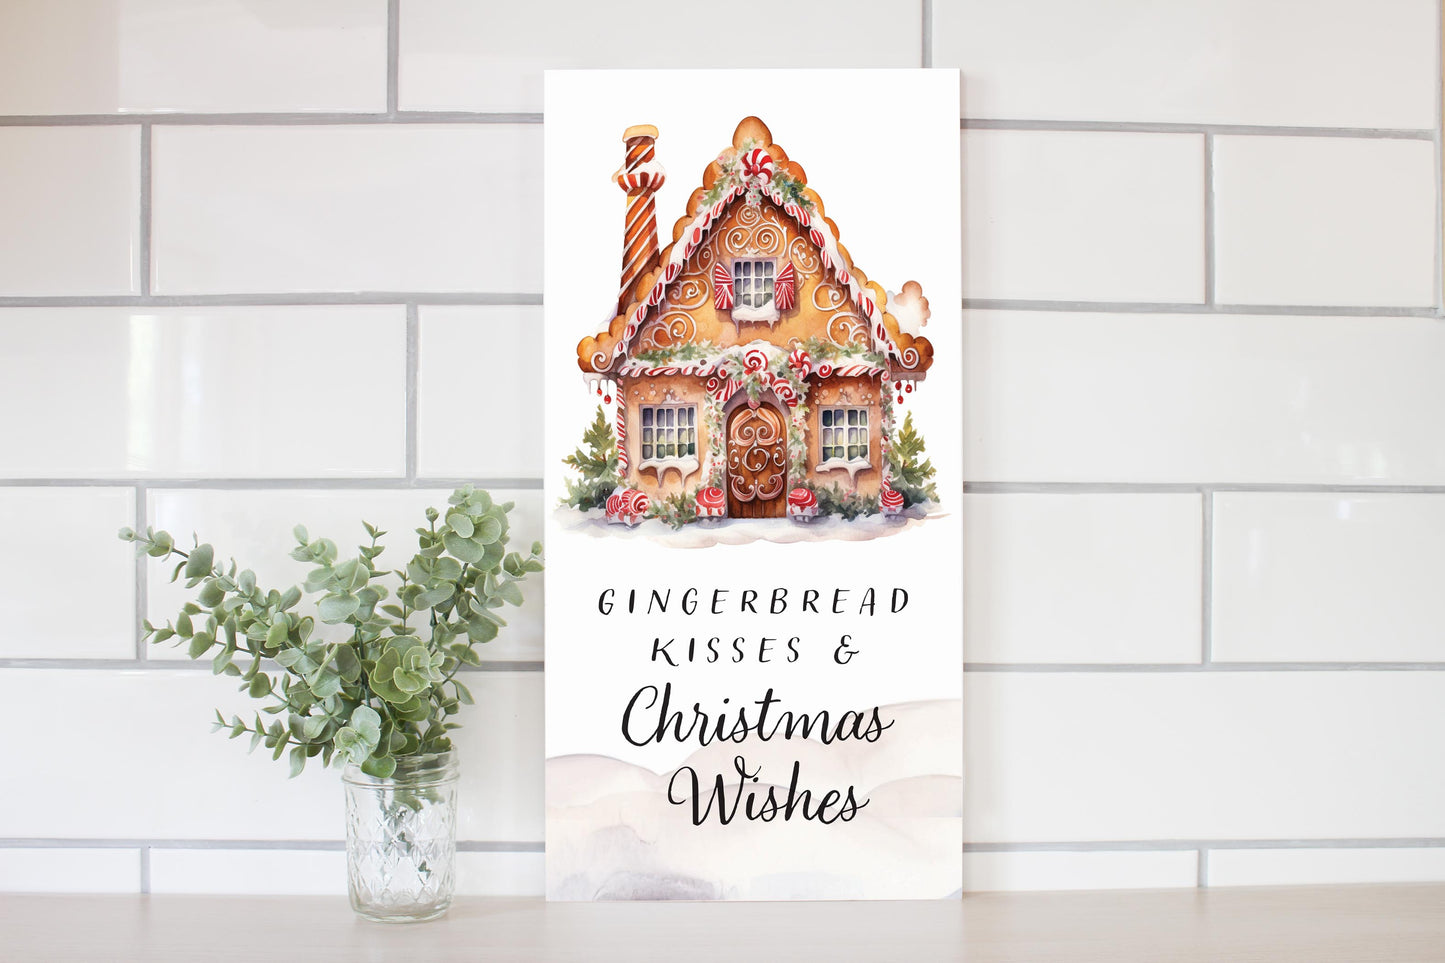 Gingerbread Kisses & Christmas Wishes House